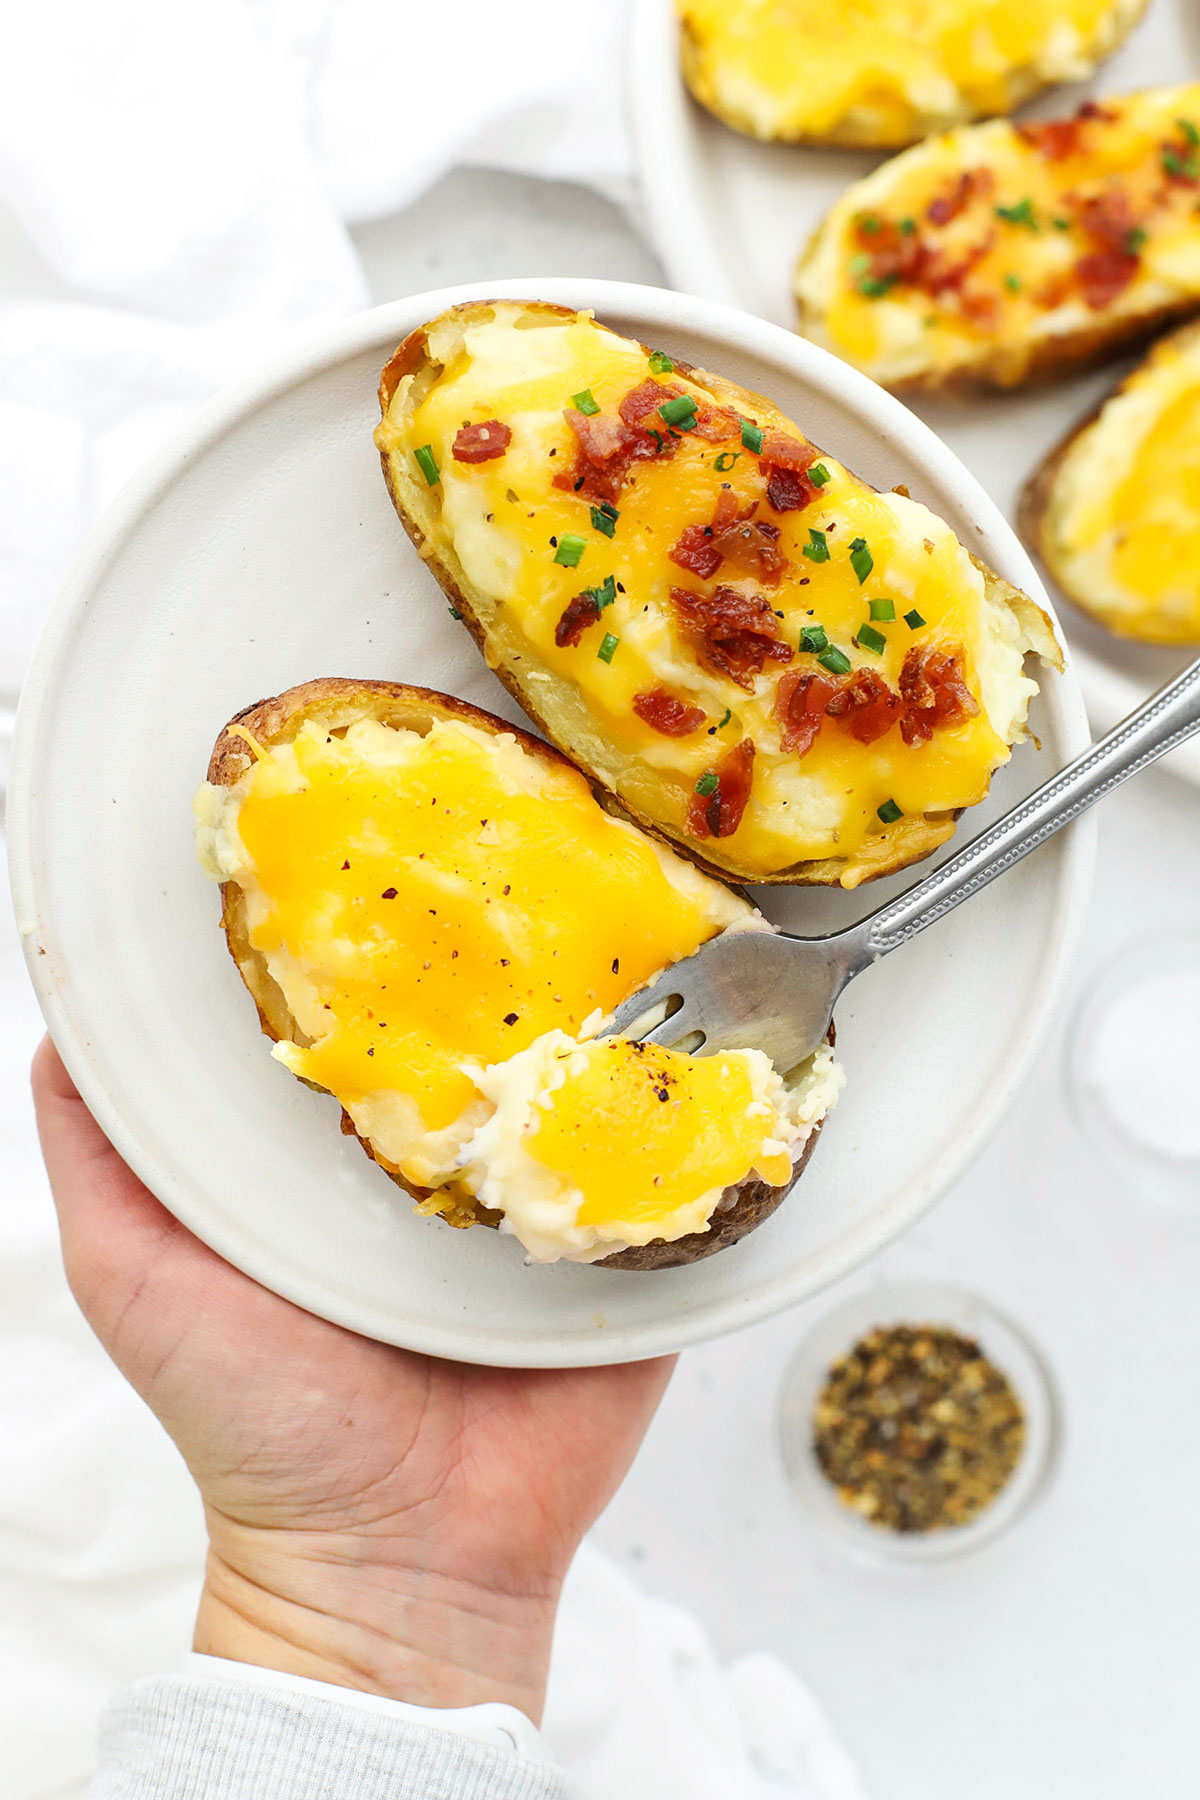 Our Twice Baked Potatoes recipe is a popular side dish that's delicious with all sorts of dinners. Don't miss all our favorite add-ins and toppings to try! / easy twice-baked potatoes recipe / gluten-free twice baked potatoes recipe / twice baked potatoes with cheese / twice baked potatoes with bacon / the best twice baked potatoes recipe / easter side dish / easter potatoes / thanksgiving side dish / thanksgiving potatoes /